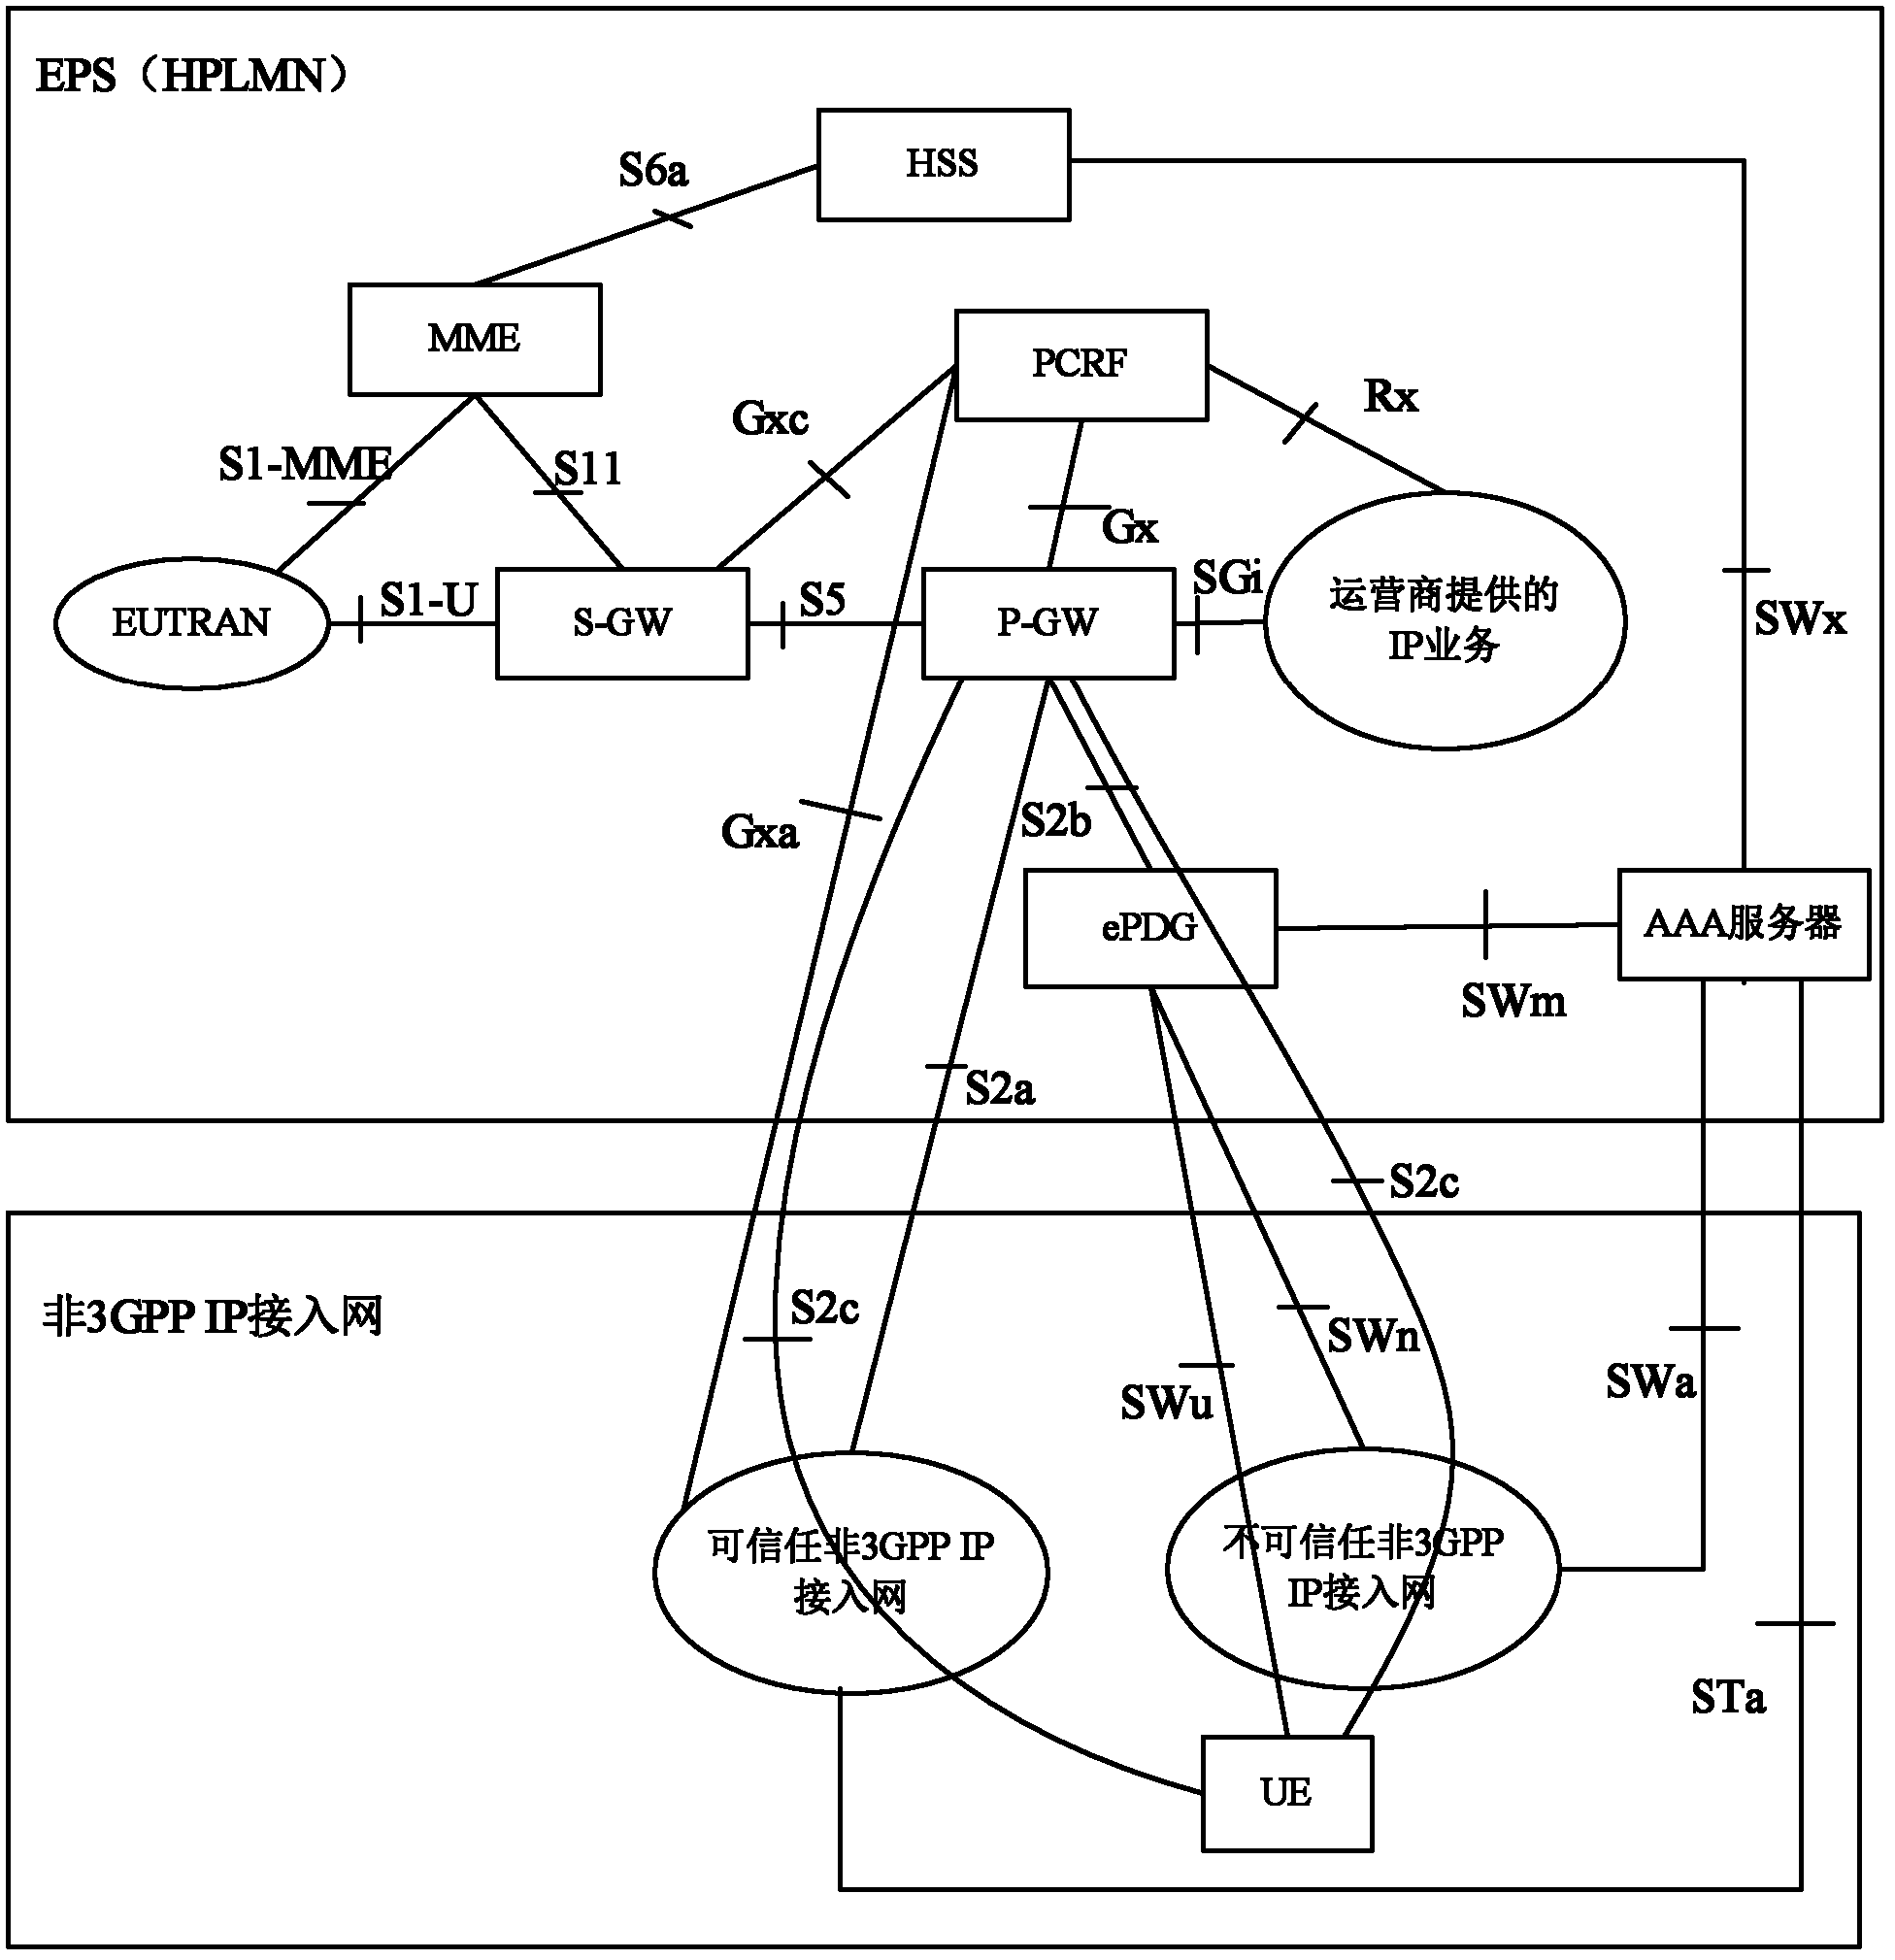 Methods and system for achieving QoS (quality of service) reflection mechanism